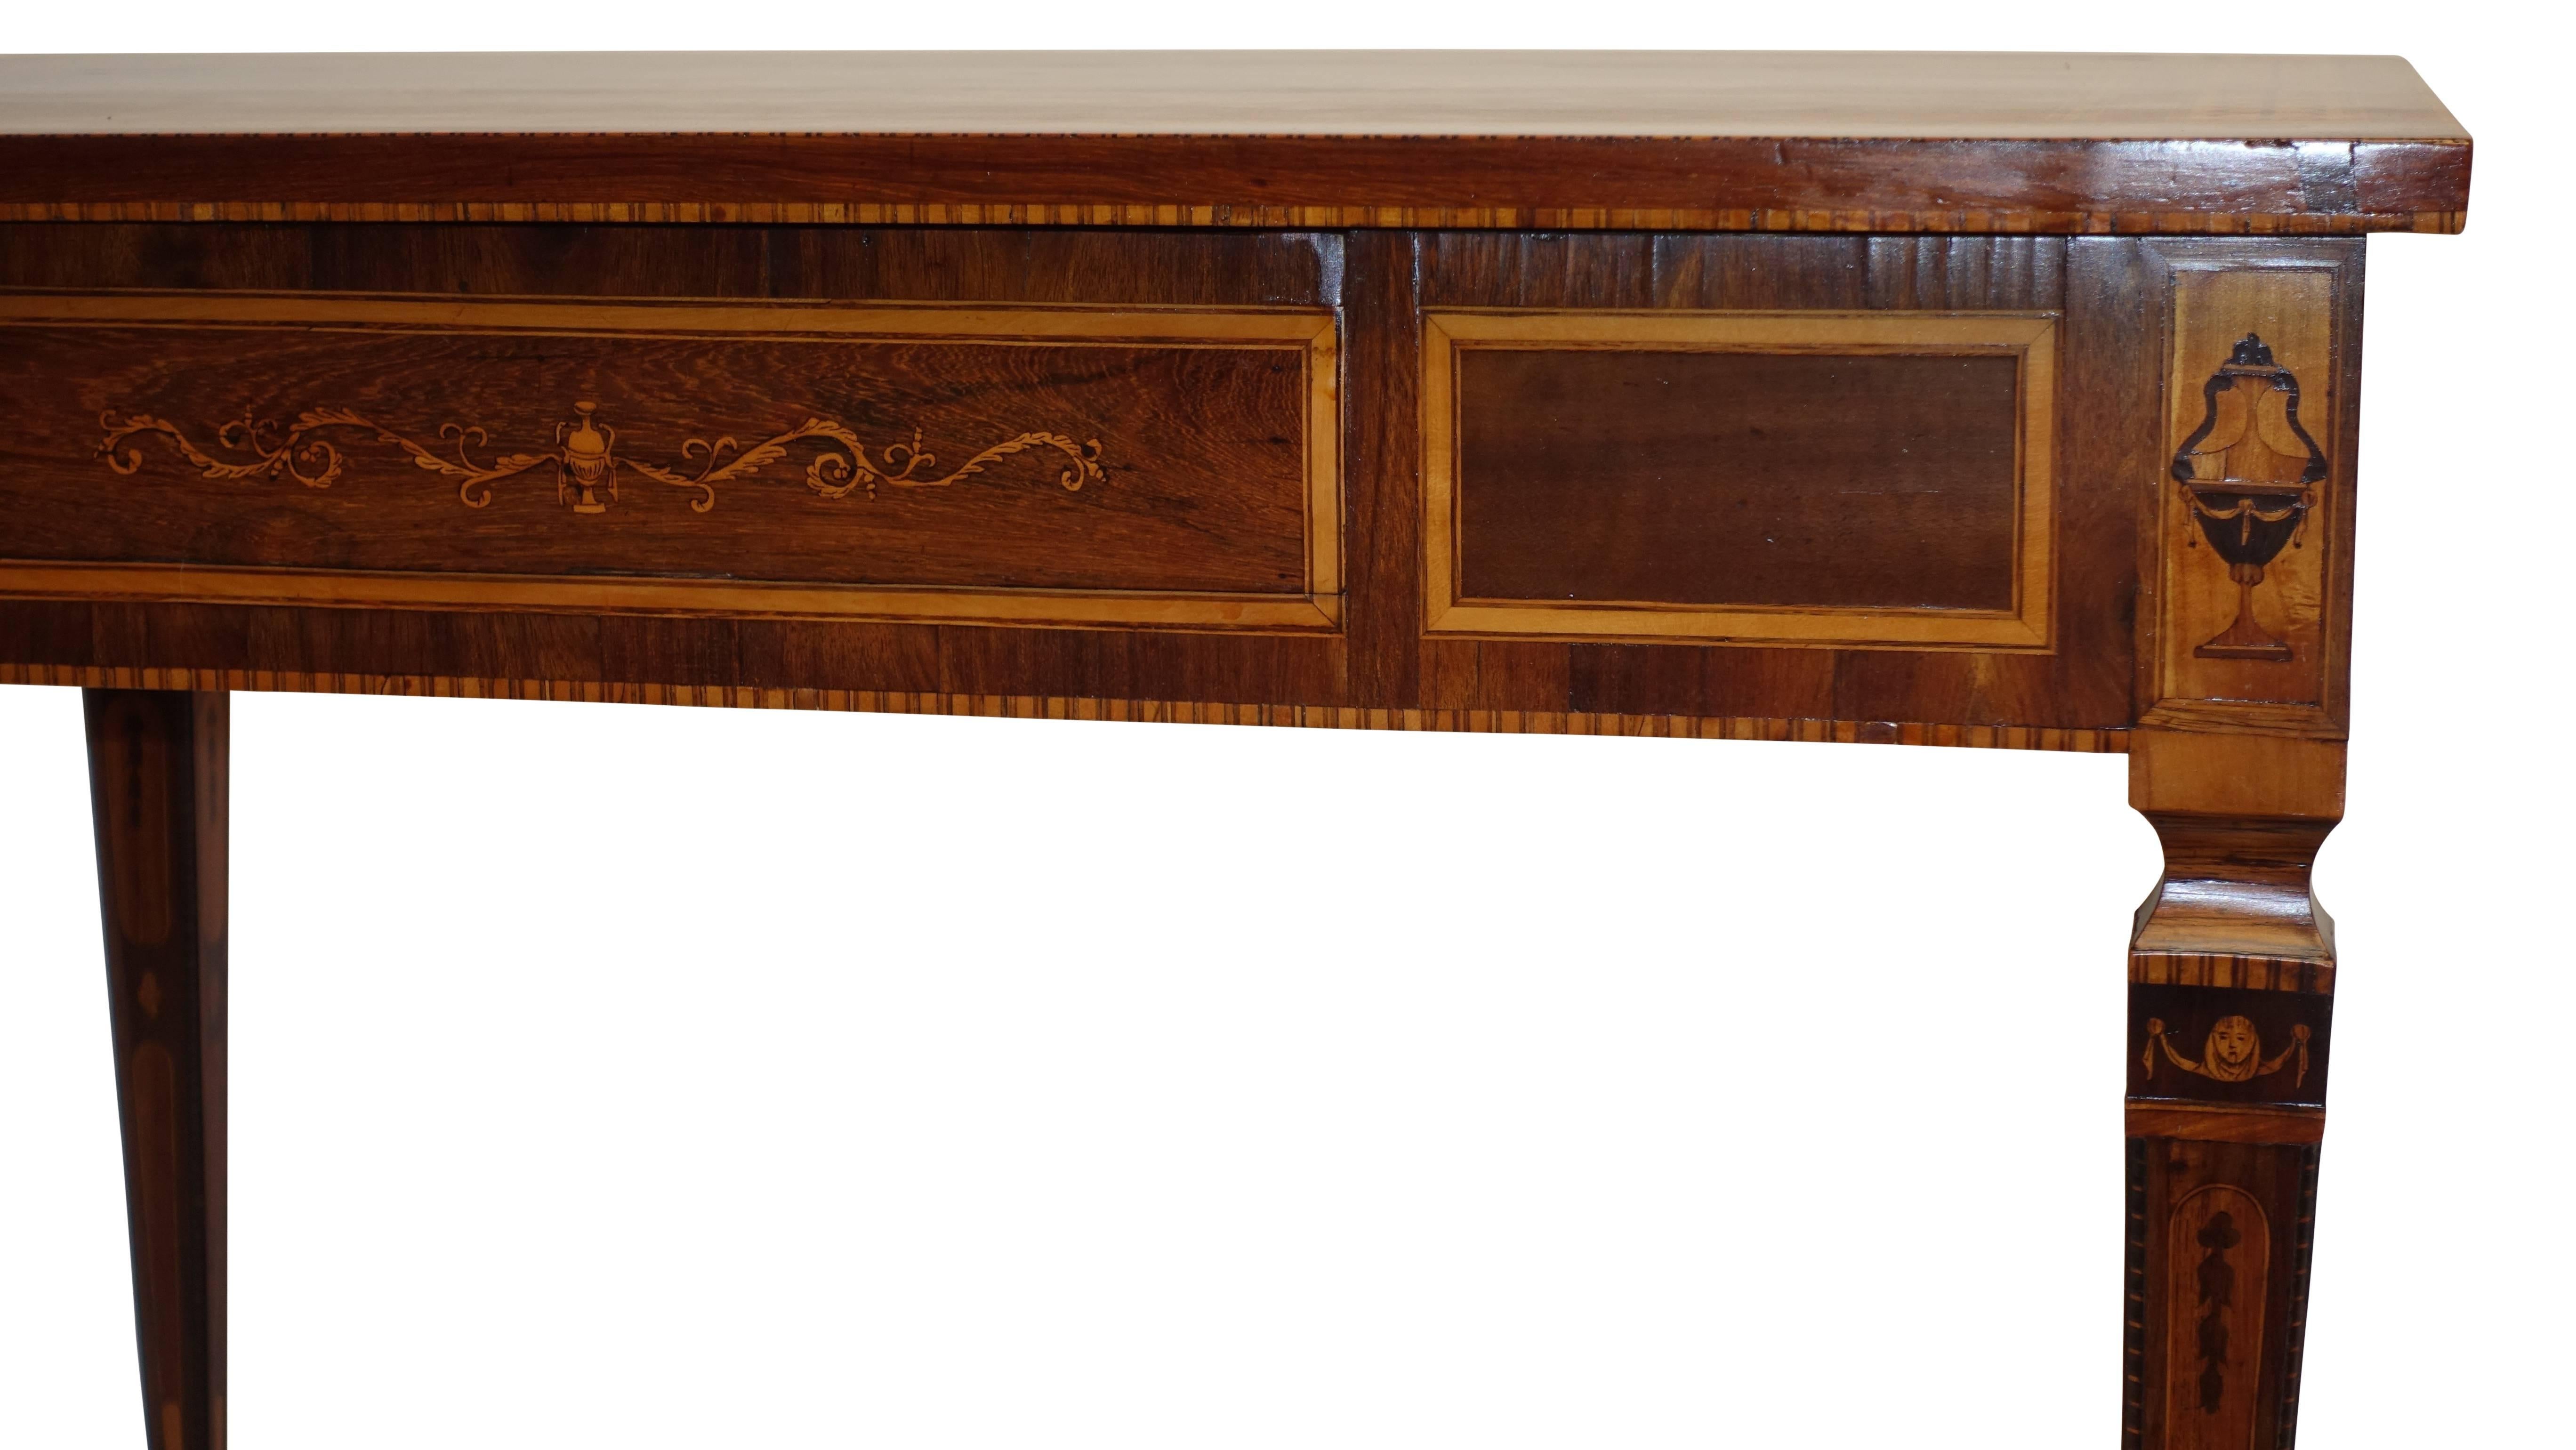 Mixed Woods Marquetry Inlaid Writing Table, Northern Italian, Late 18th Century For Sale 2